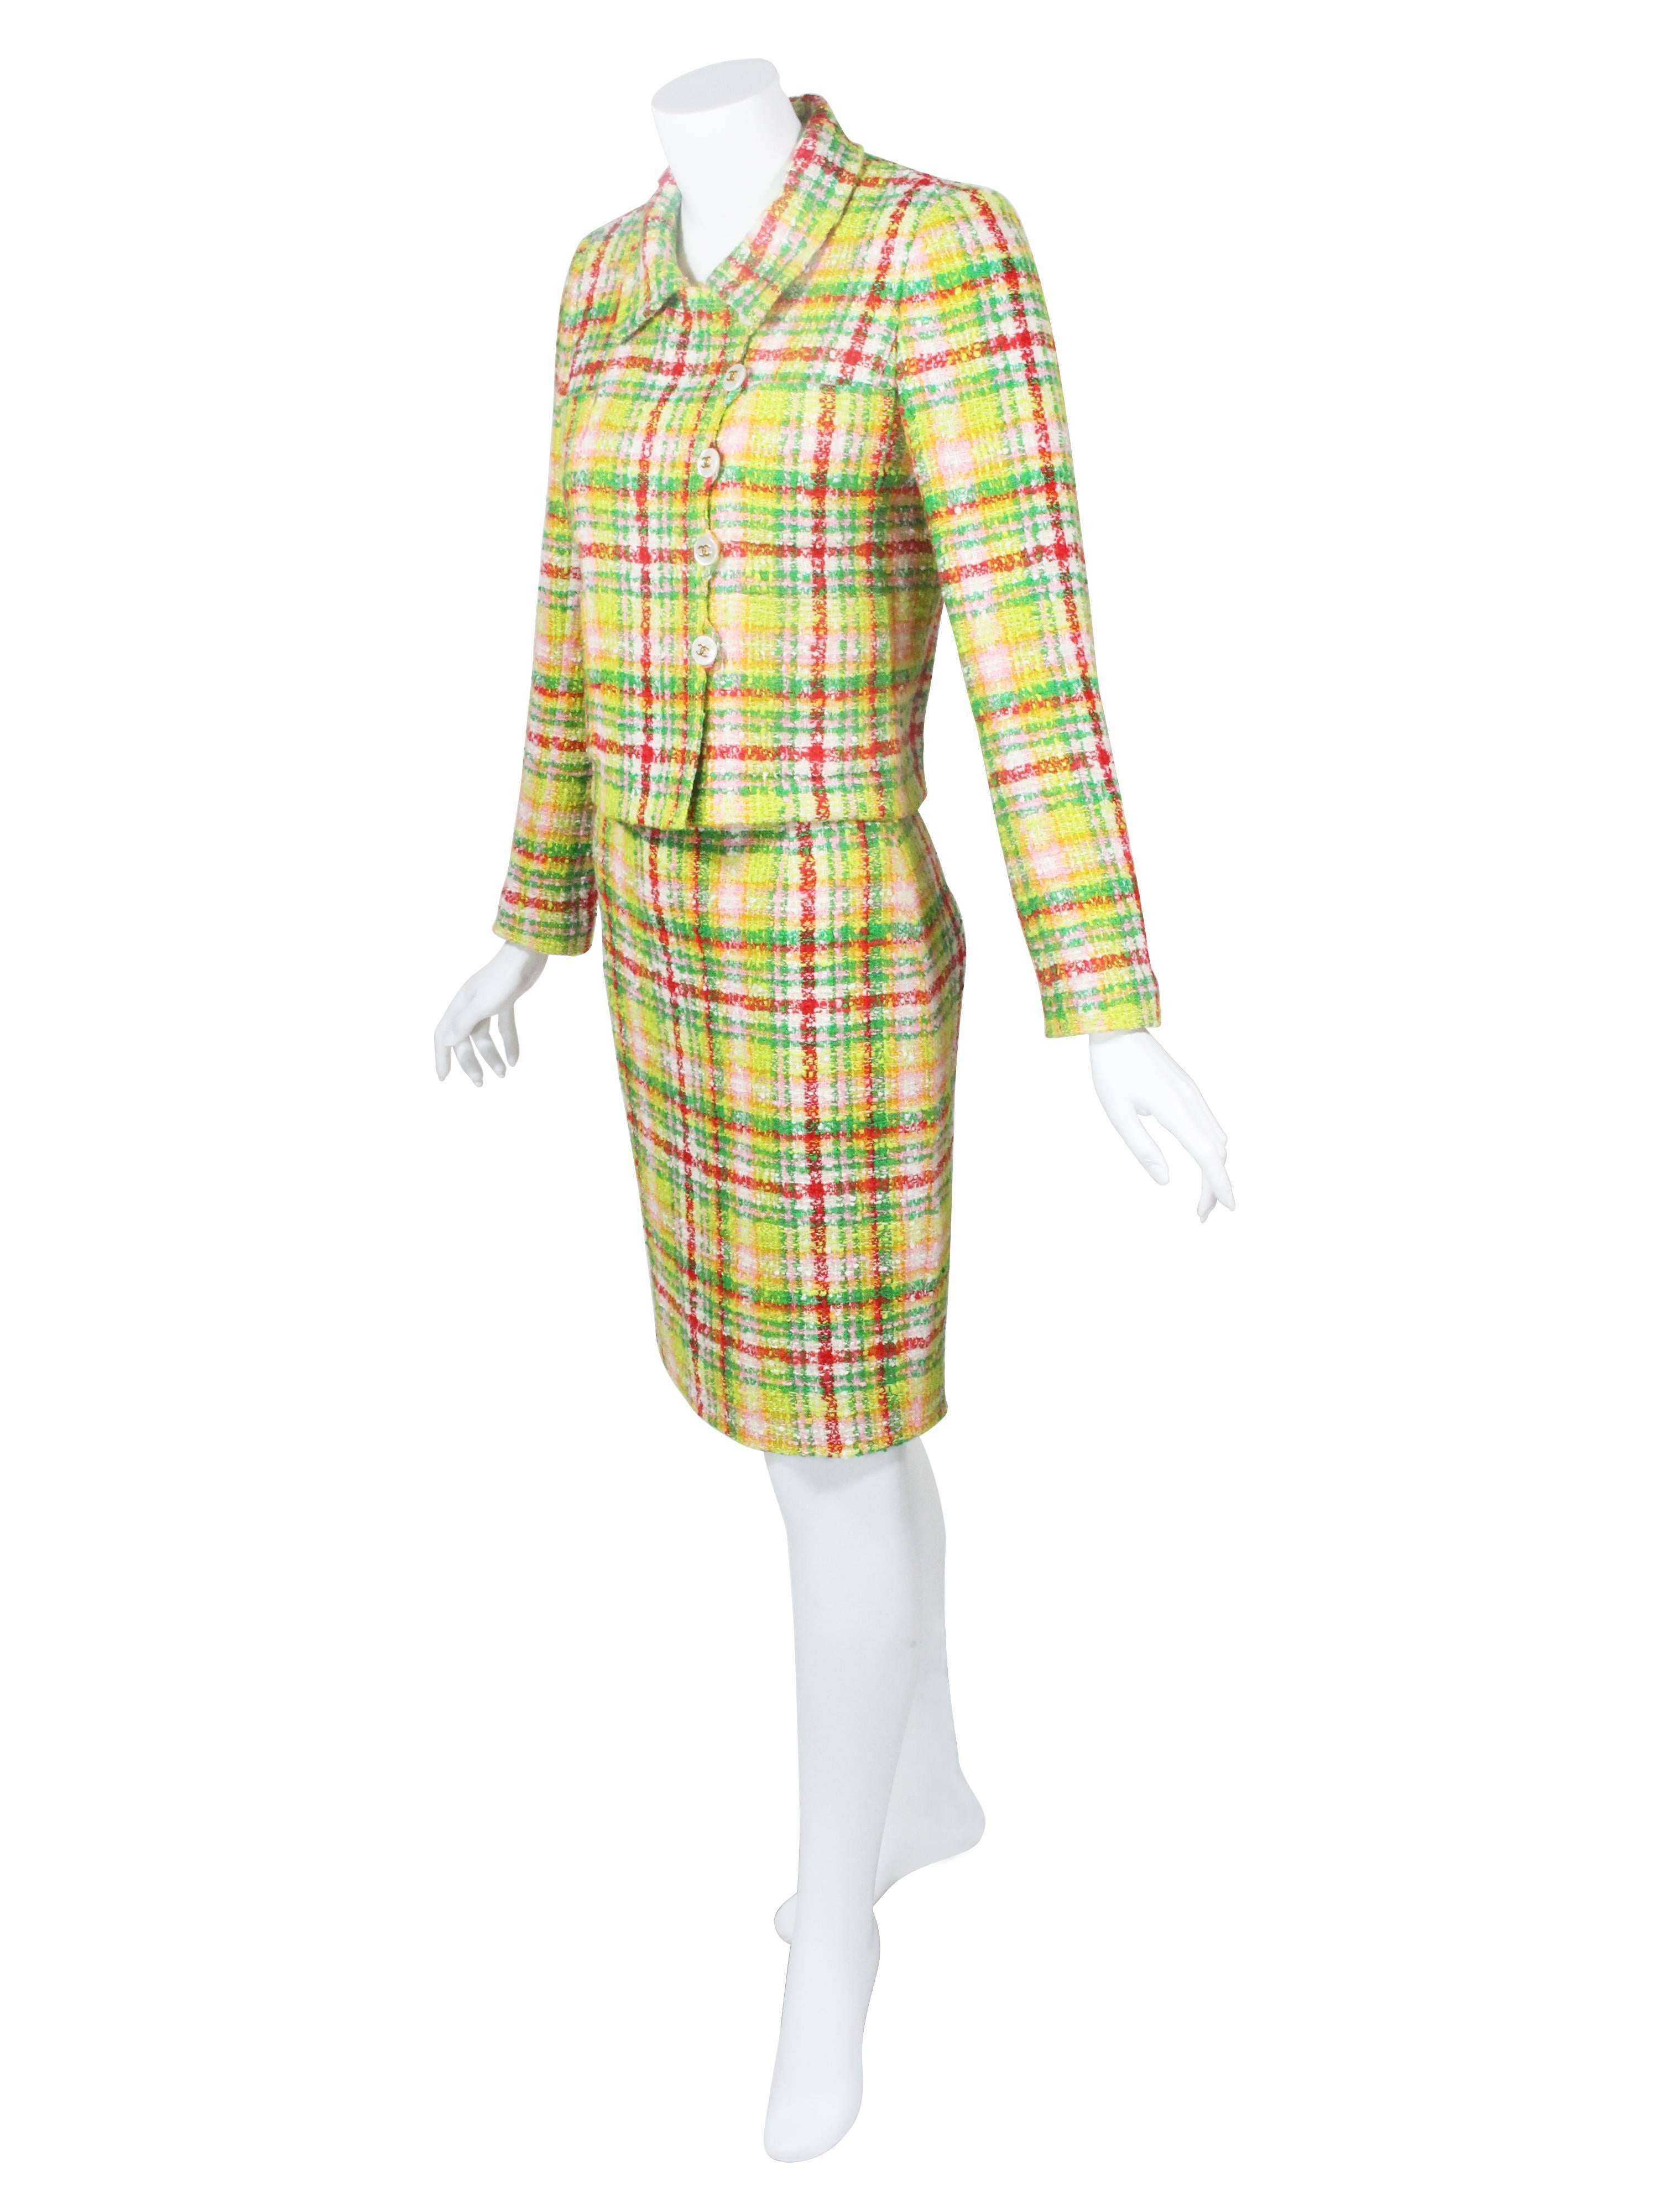 An forever classic skirt suit from the house of Chanel .Done in a green and multicolor bouclé plaid. Jacket features padded shoulders, four patch pockets and 5 beautiful pearlized with gold CC button closures at front, and four buttons on each